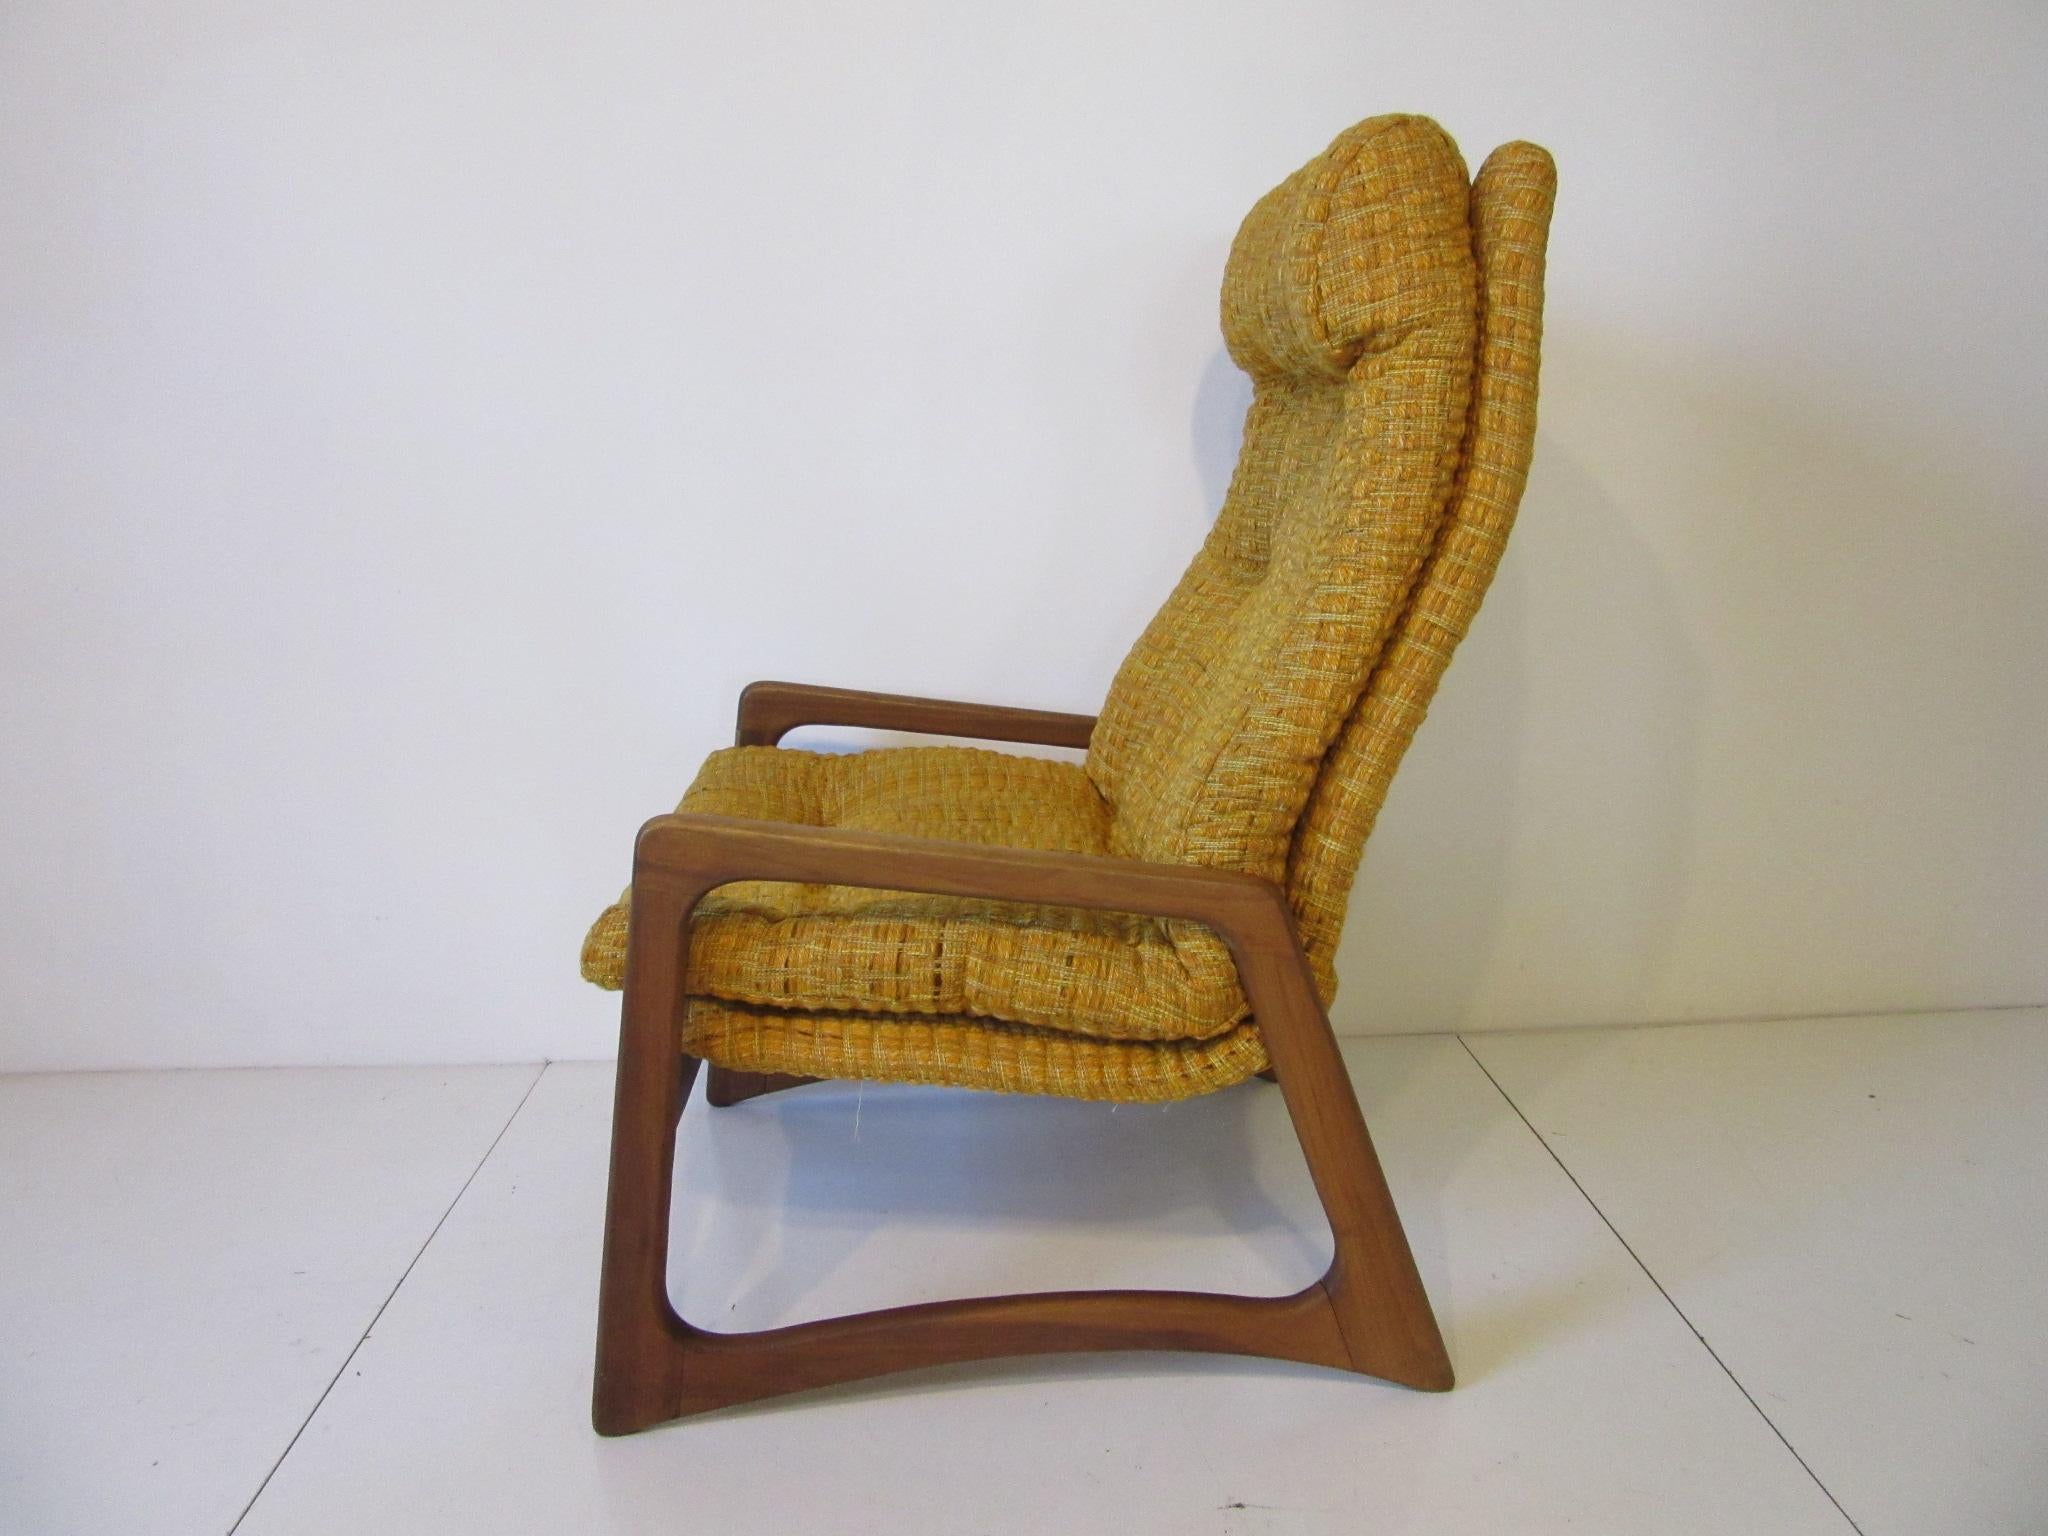 A sculptural solid walnut framed lounge chair with button details to the original upholstery which is a soft orange, gold and yellow woven fabric . Designed by the American craftsman and manufacturer Adrian Pearsall and produced by this company